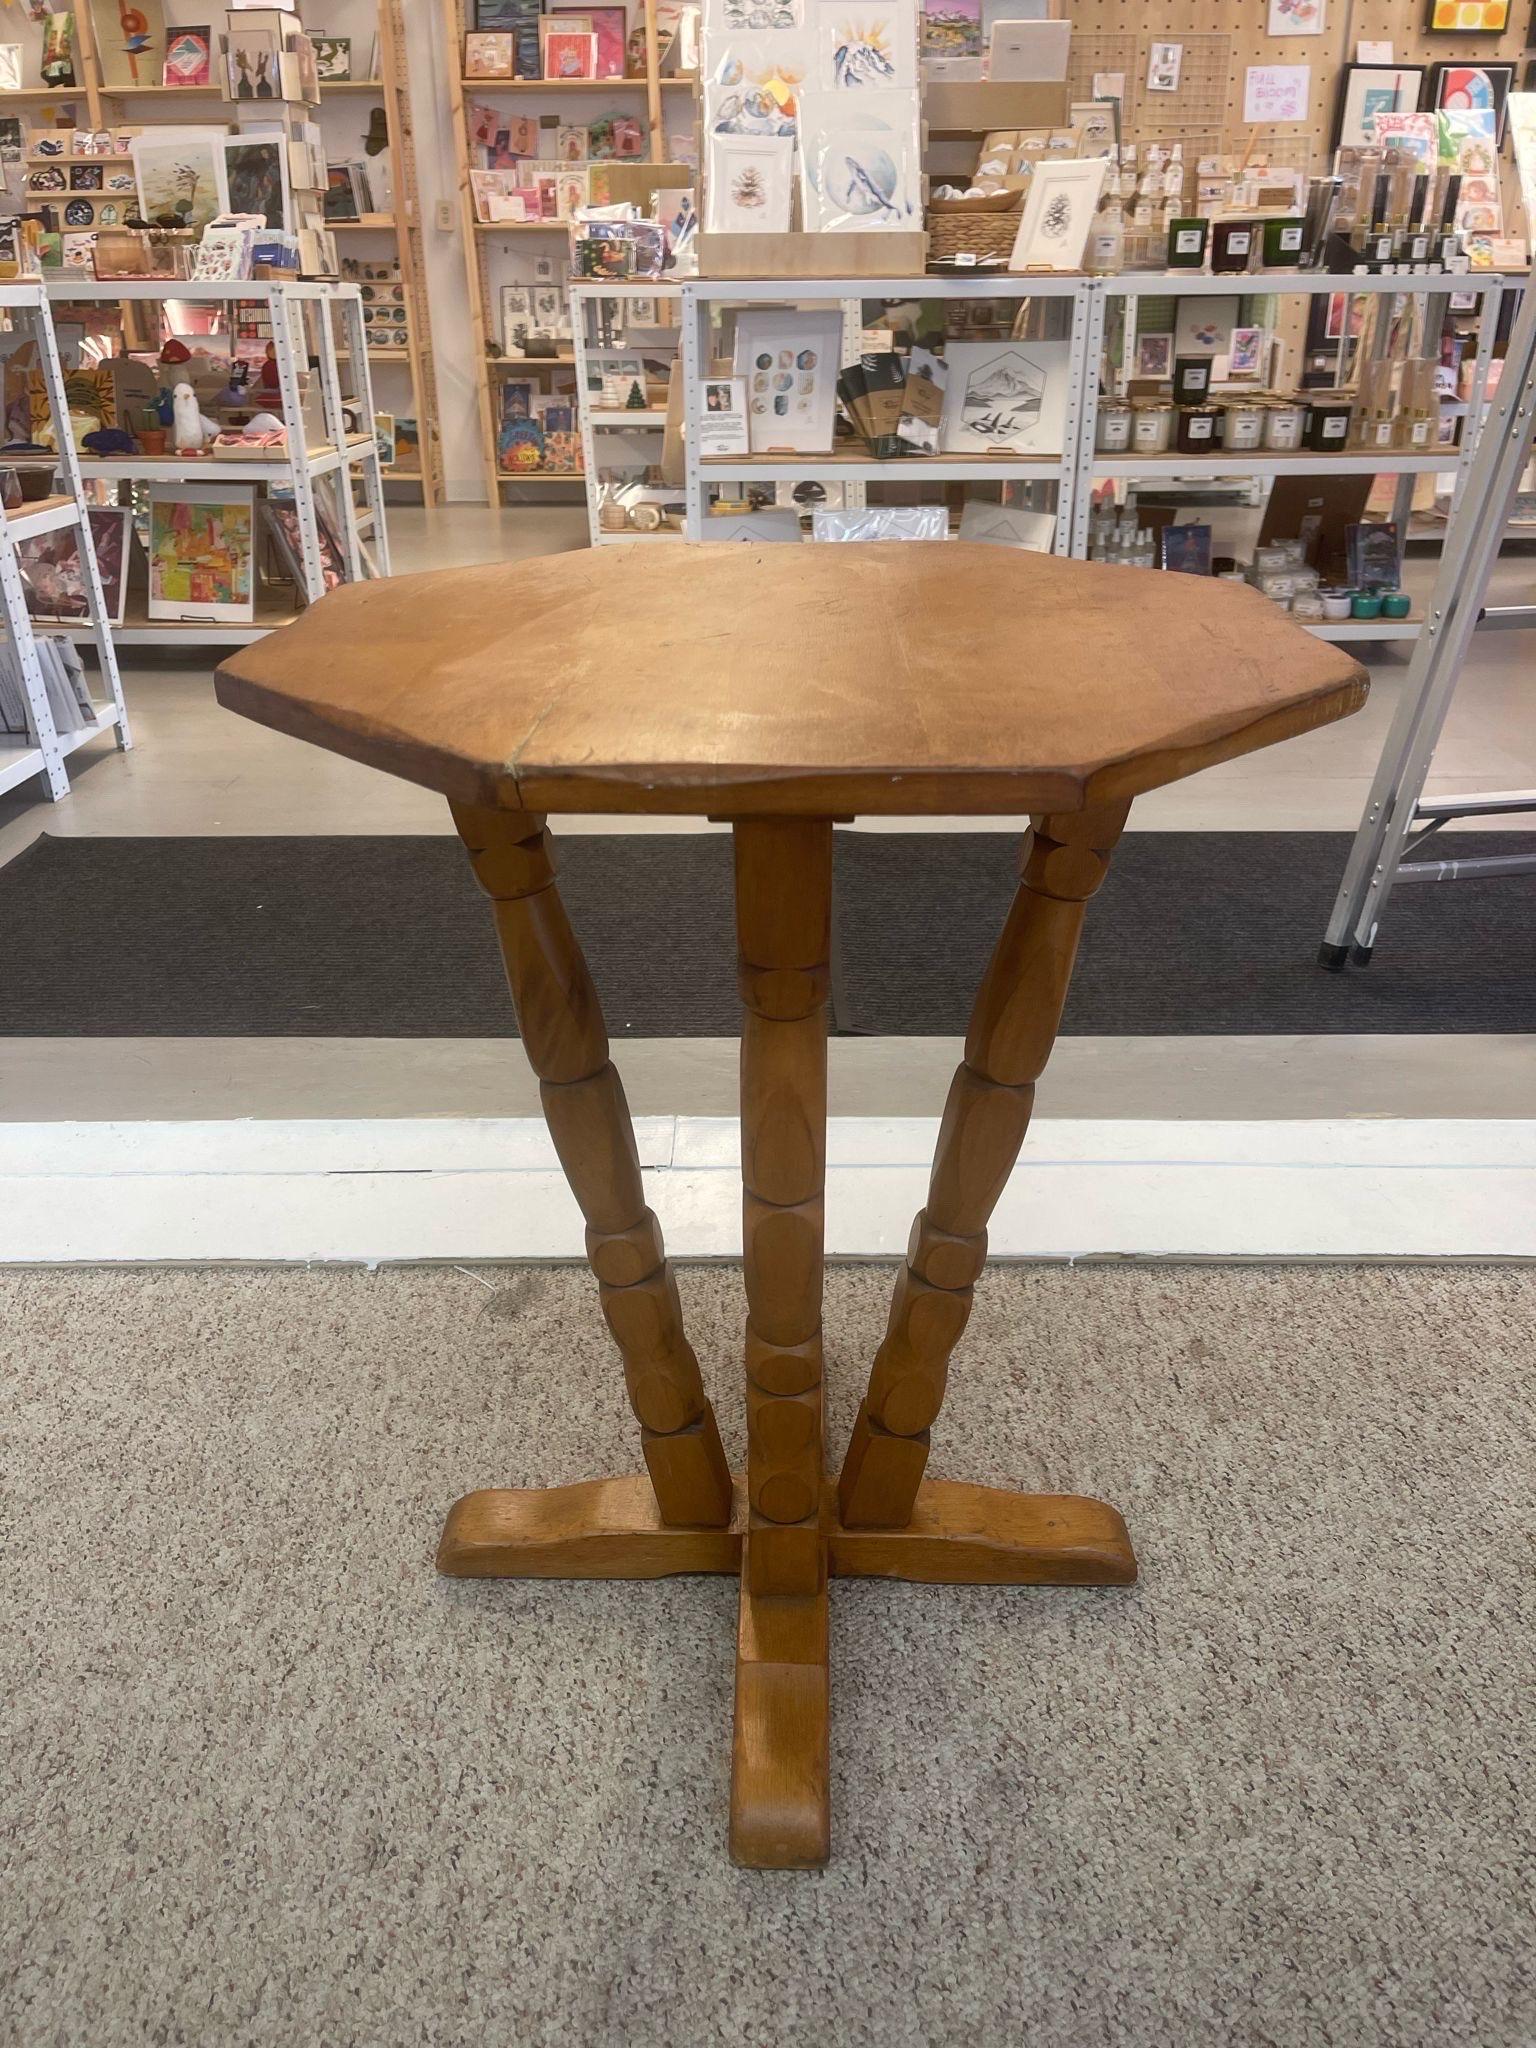 Vintage Catalina style Tall Accent Table with Octagonal Shaped Top. Turned Legs. Makers Mark on the Bottom. Vintage Condition Consistent with Age as Pictured.

Dimensions. 31 W ; 21 D ; 25 1/2 H